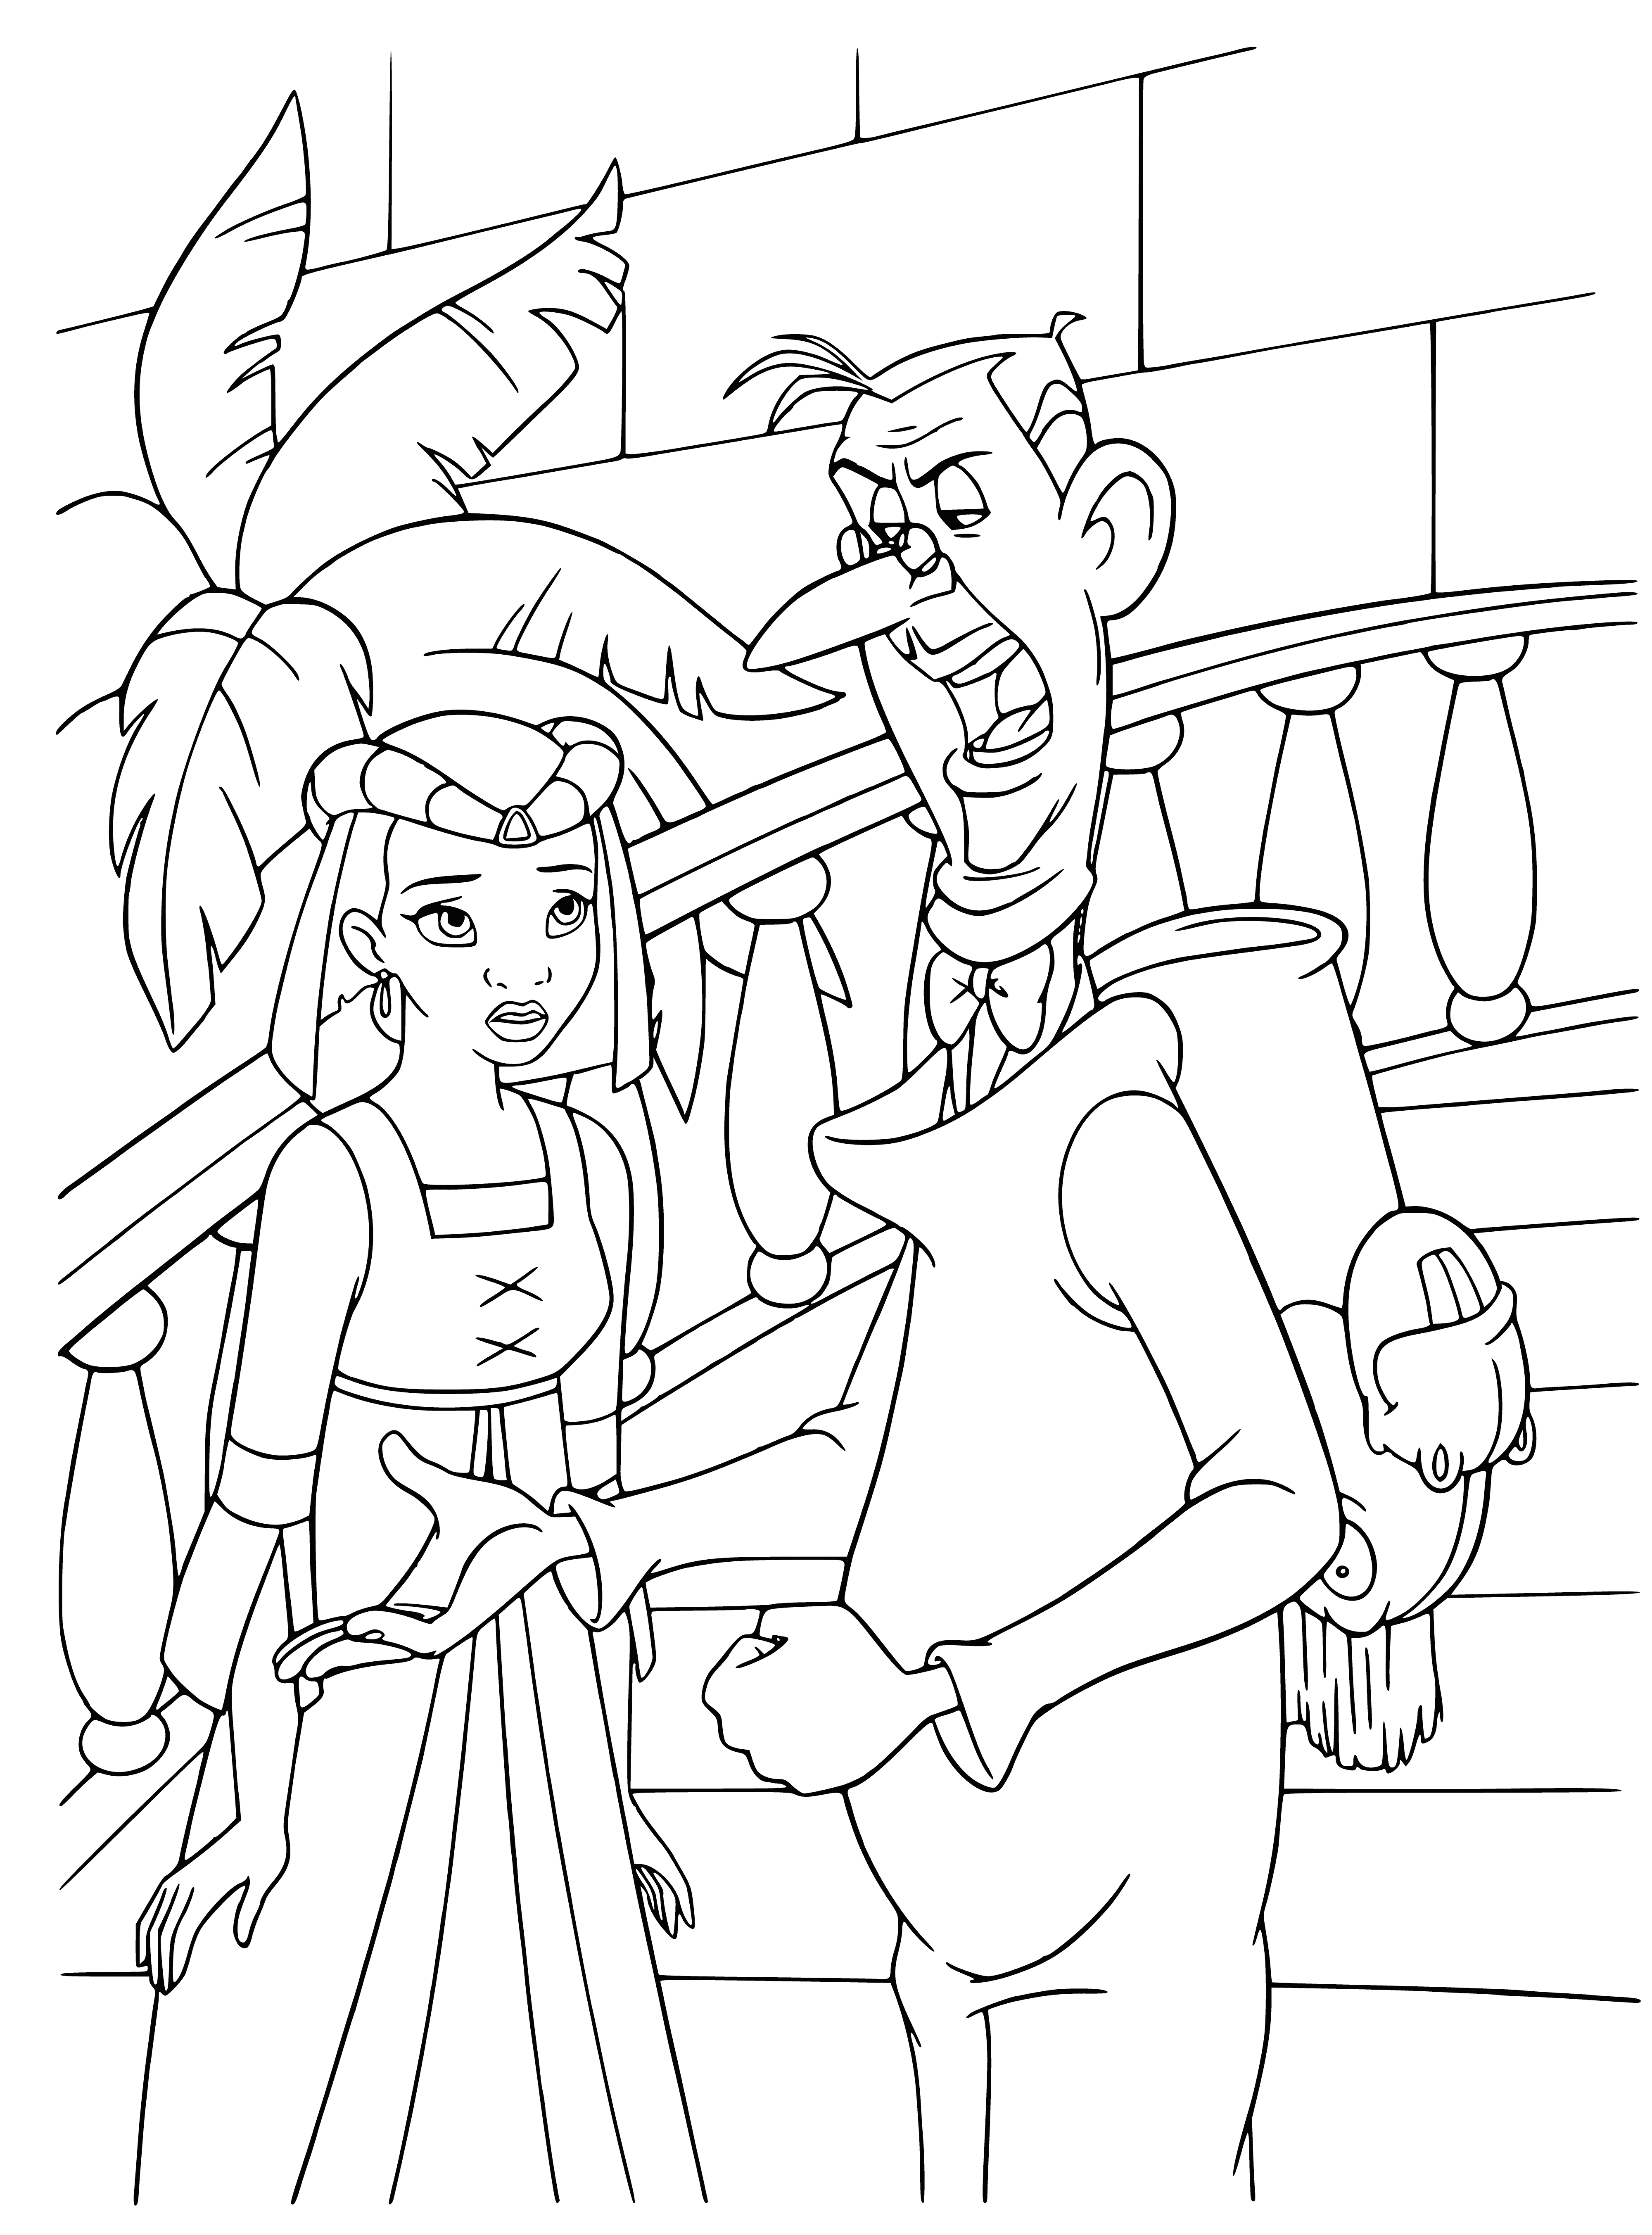 coloring page: Tiana stands assertively behind the counter; the man in front of her looks sly.